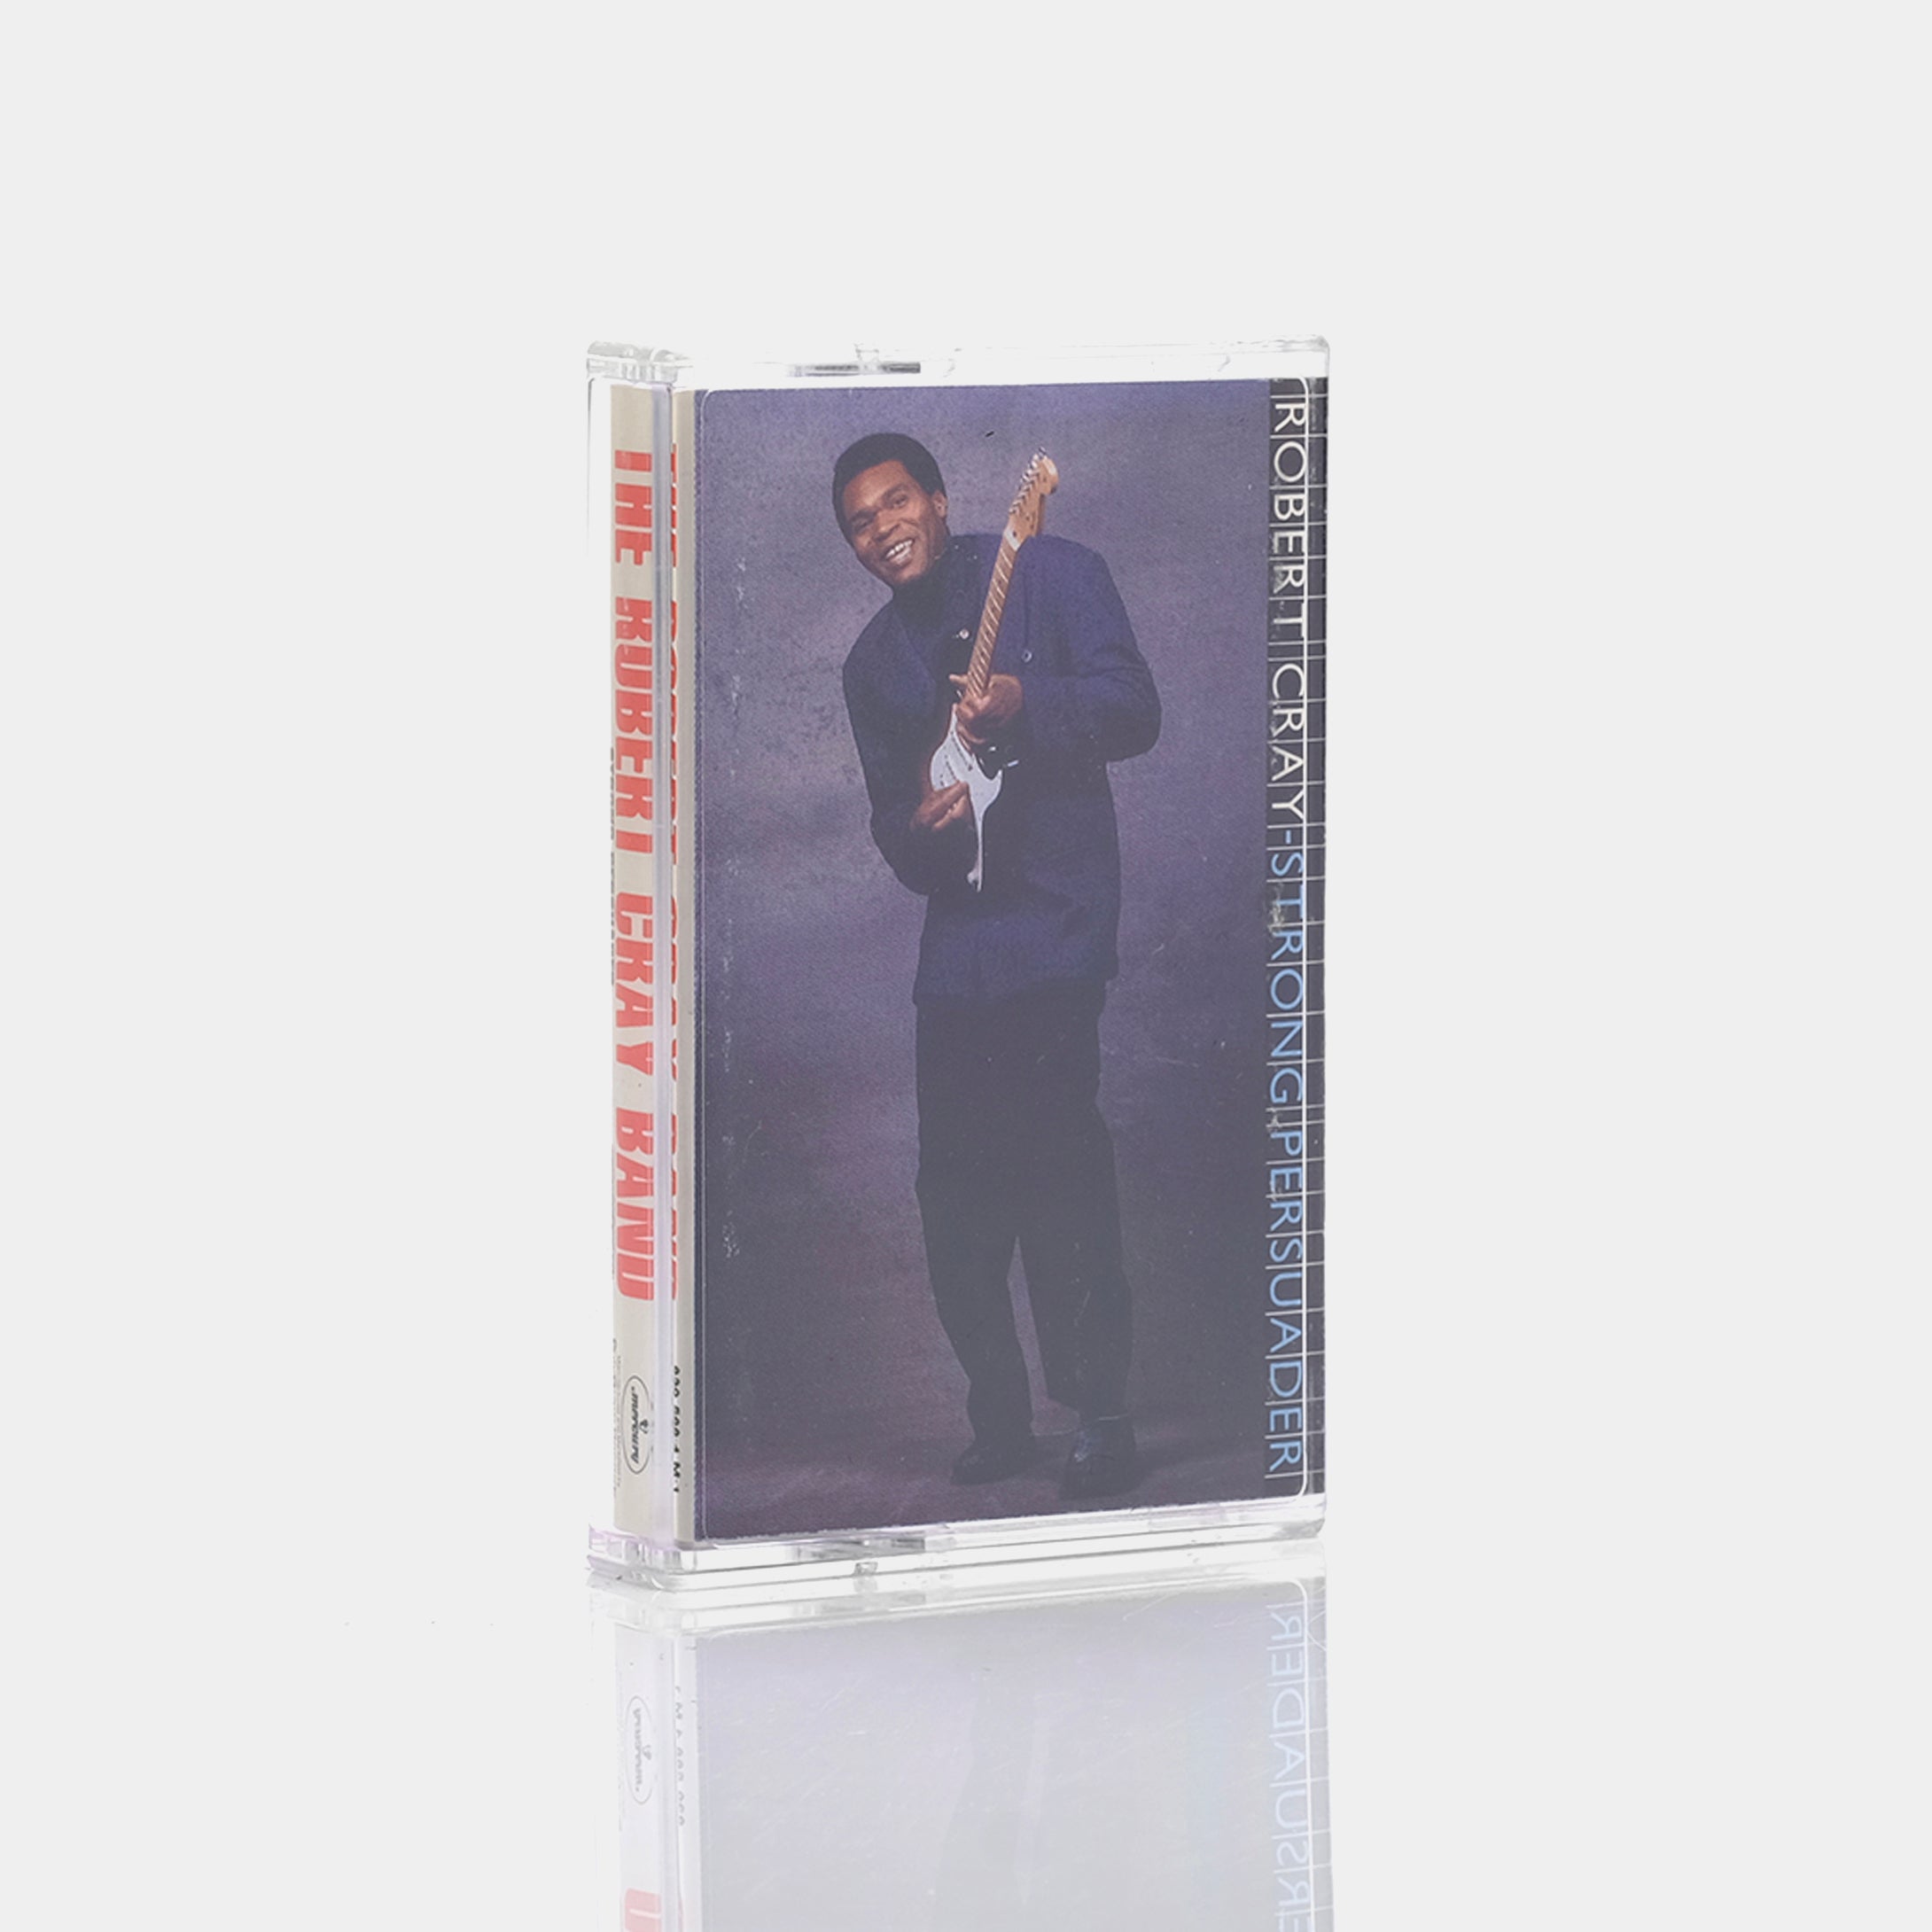 The Robert Cray Band - Strong Persuader Cassette Tape